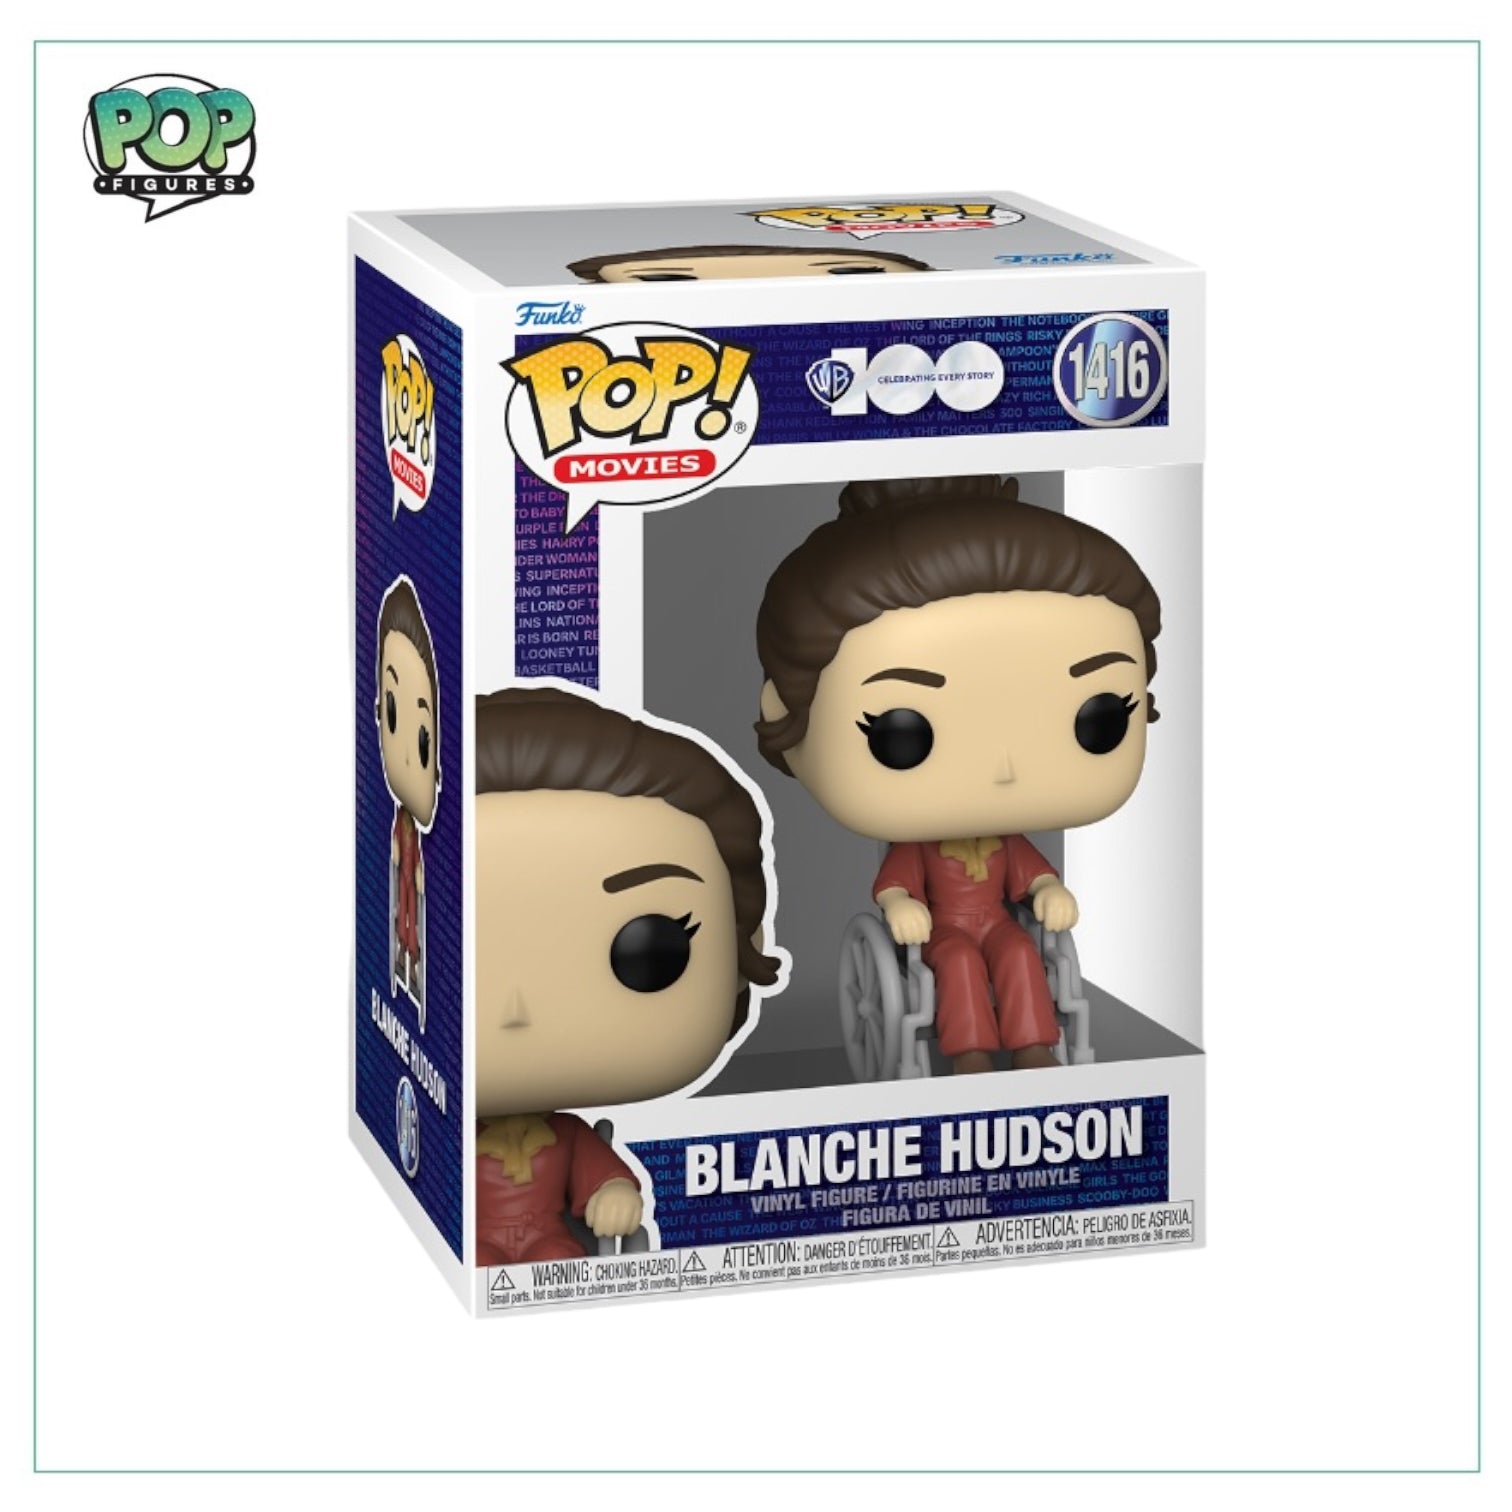 Blanche Hudson #1416 Funko Pop! - What Ever Happened to Baby Jane